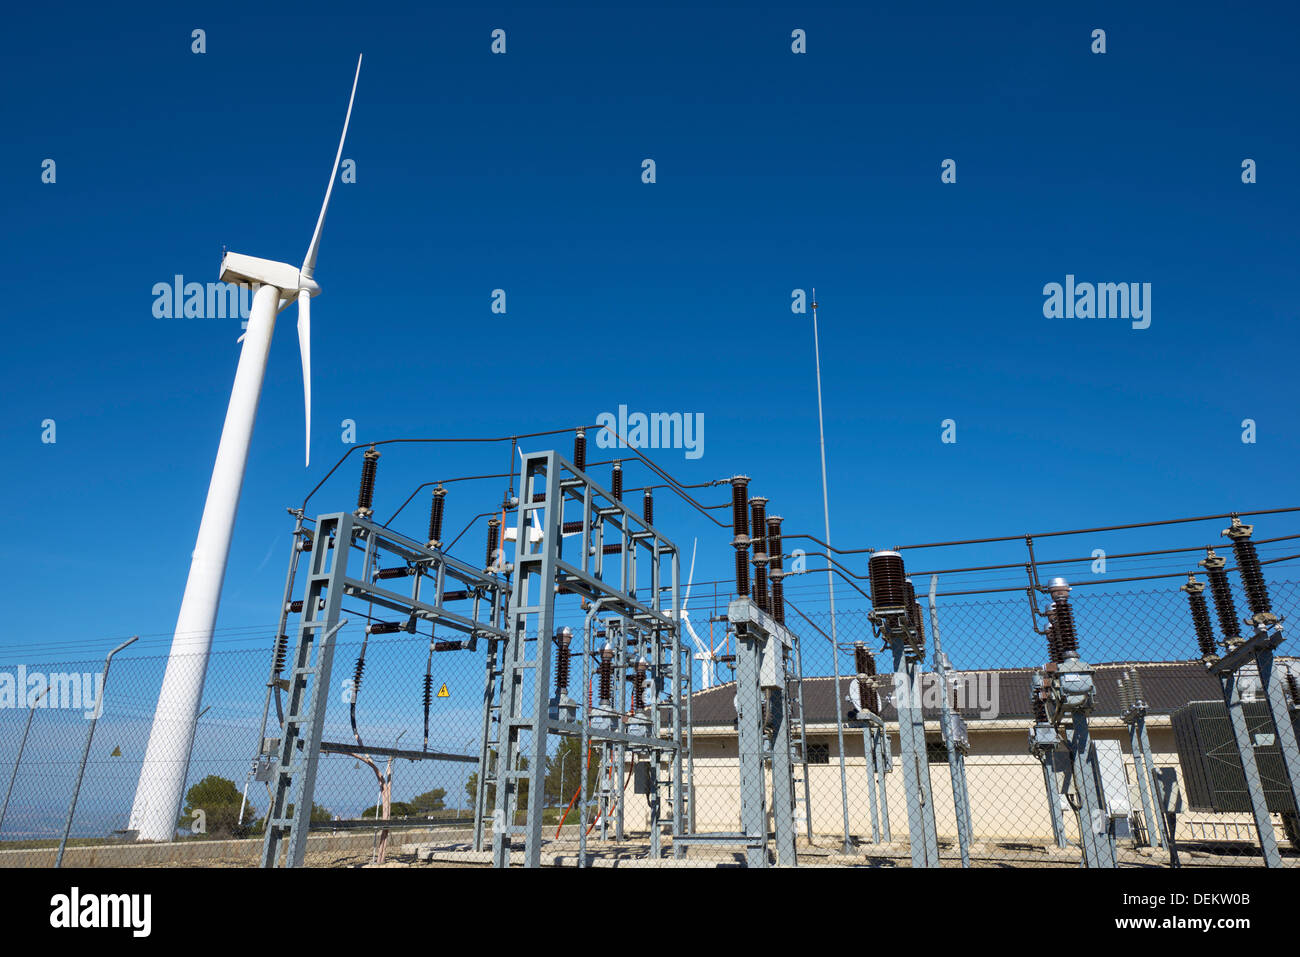 windmills for removable energy production and electrical substation, El Buste, Zaragoza, Aragon, Spain Stock Photo